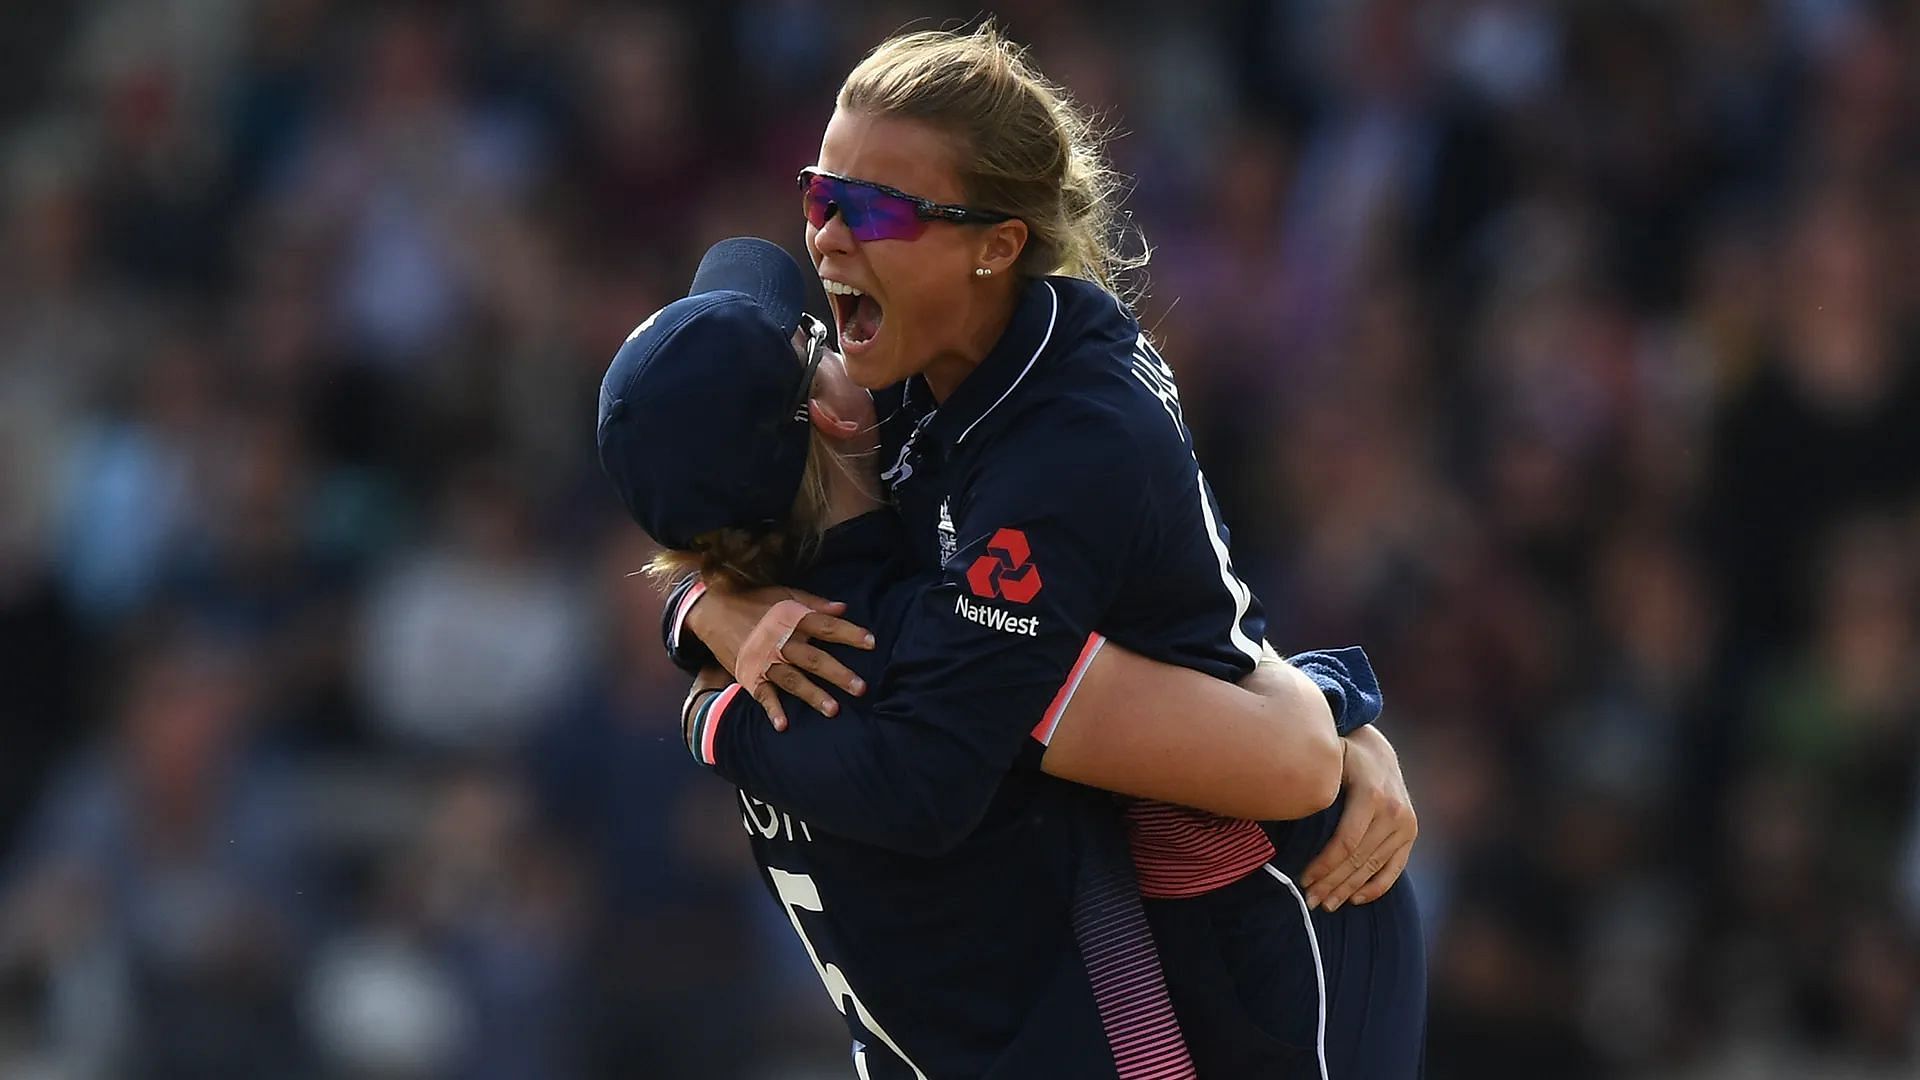 The England bowler will retire from professional cricket at the end of The Hundred. (Pic: ICC)